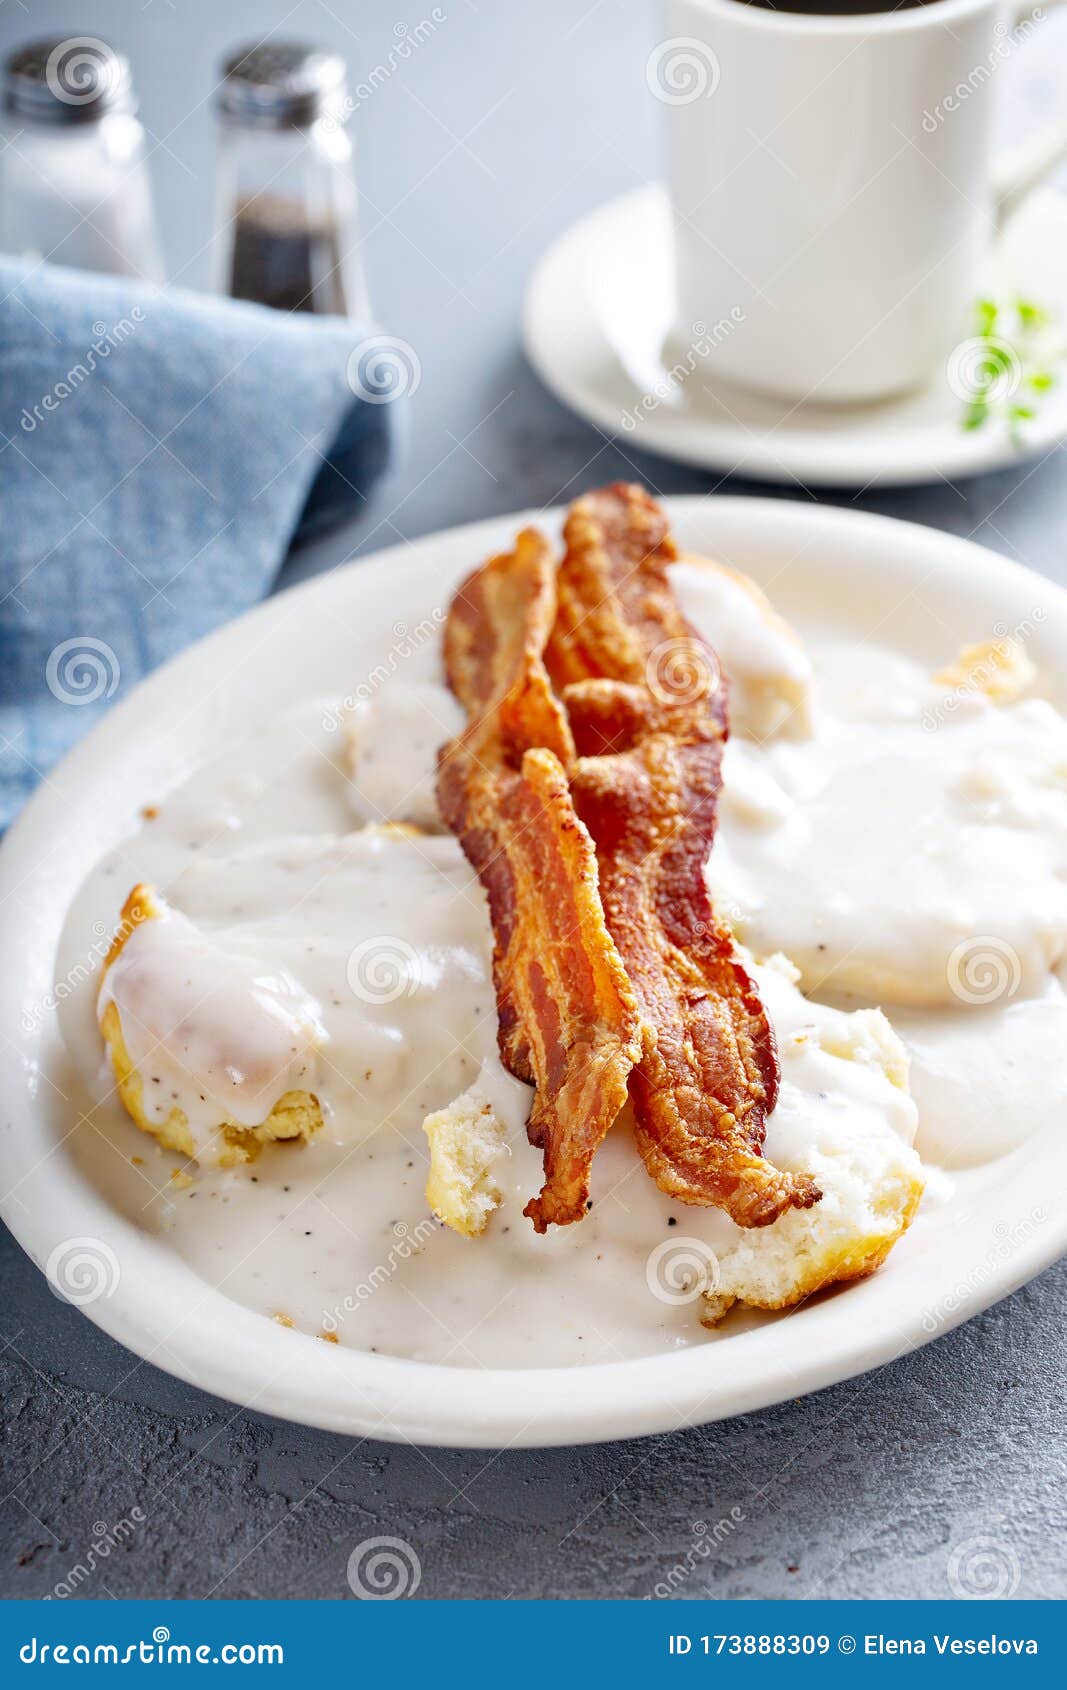 Biscuits and Gravy with Bacon for Breakfast Stock Image - Image of fork ...